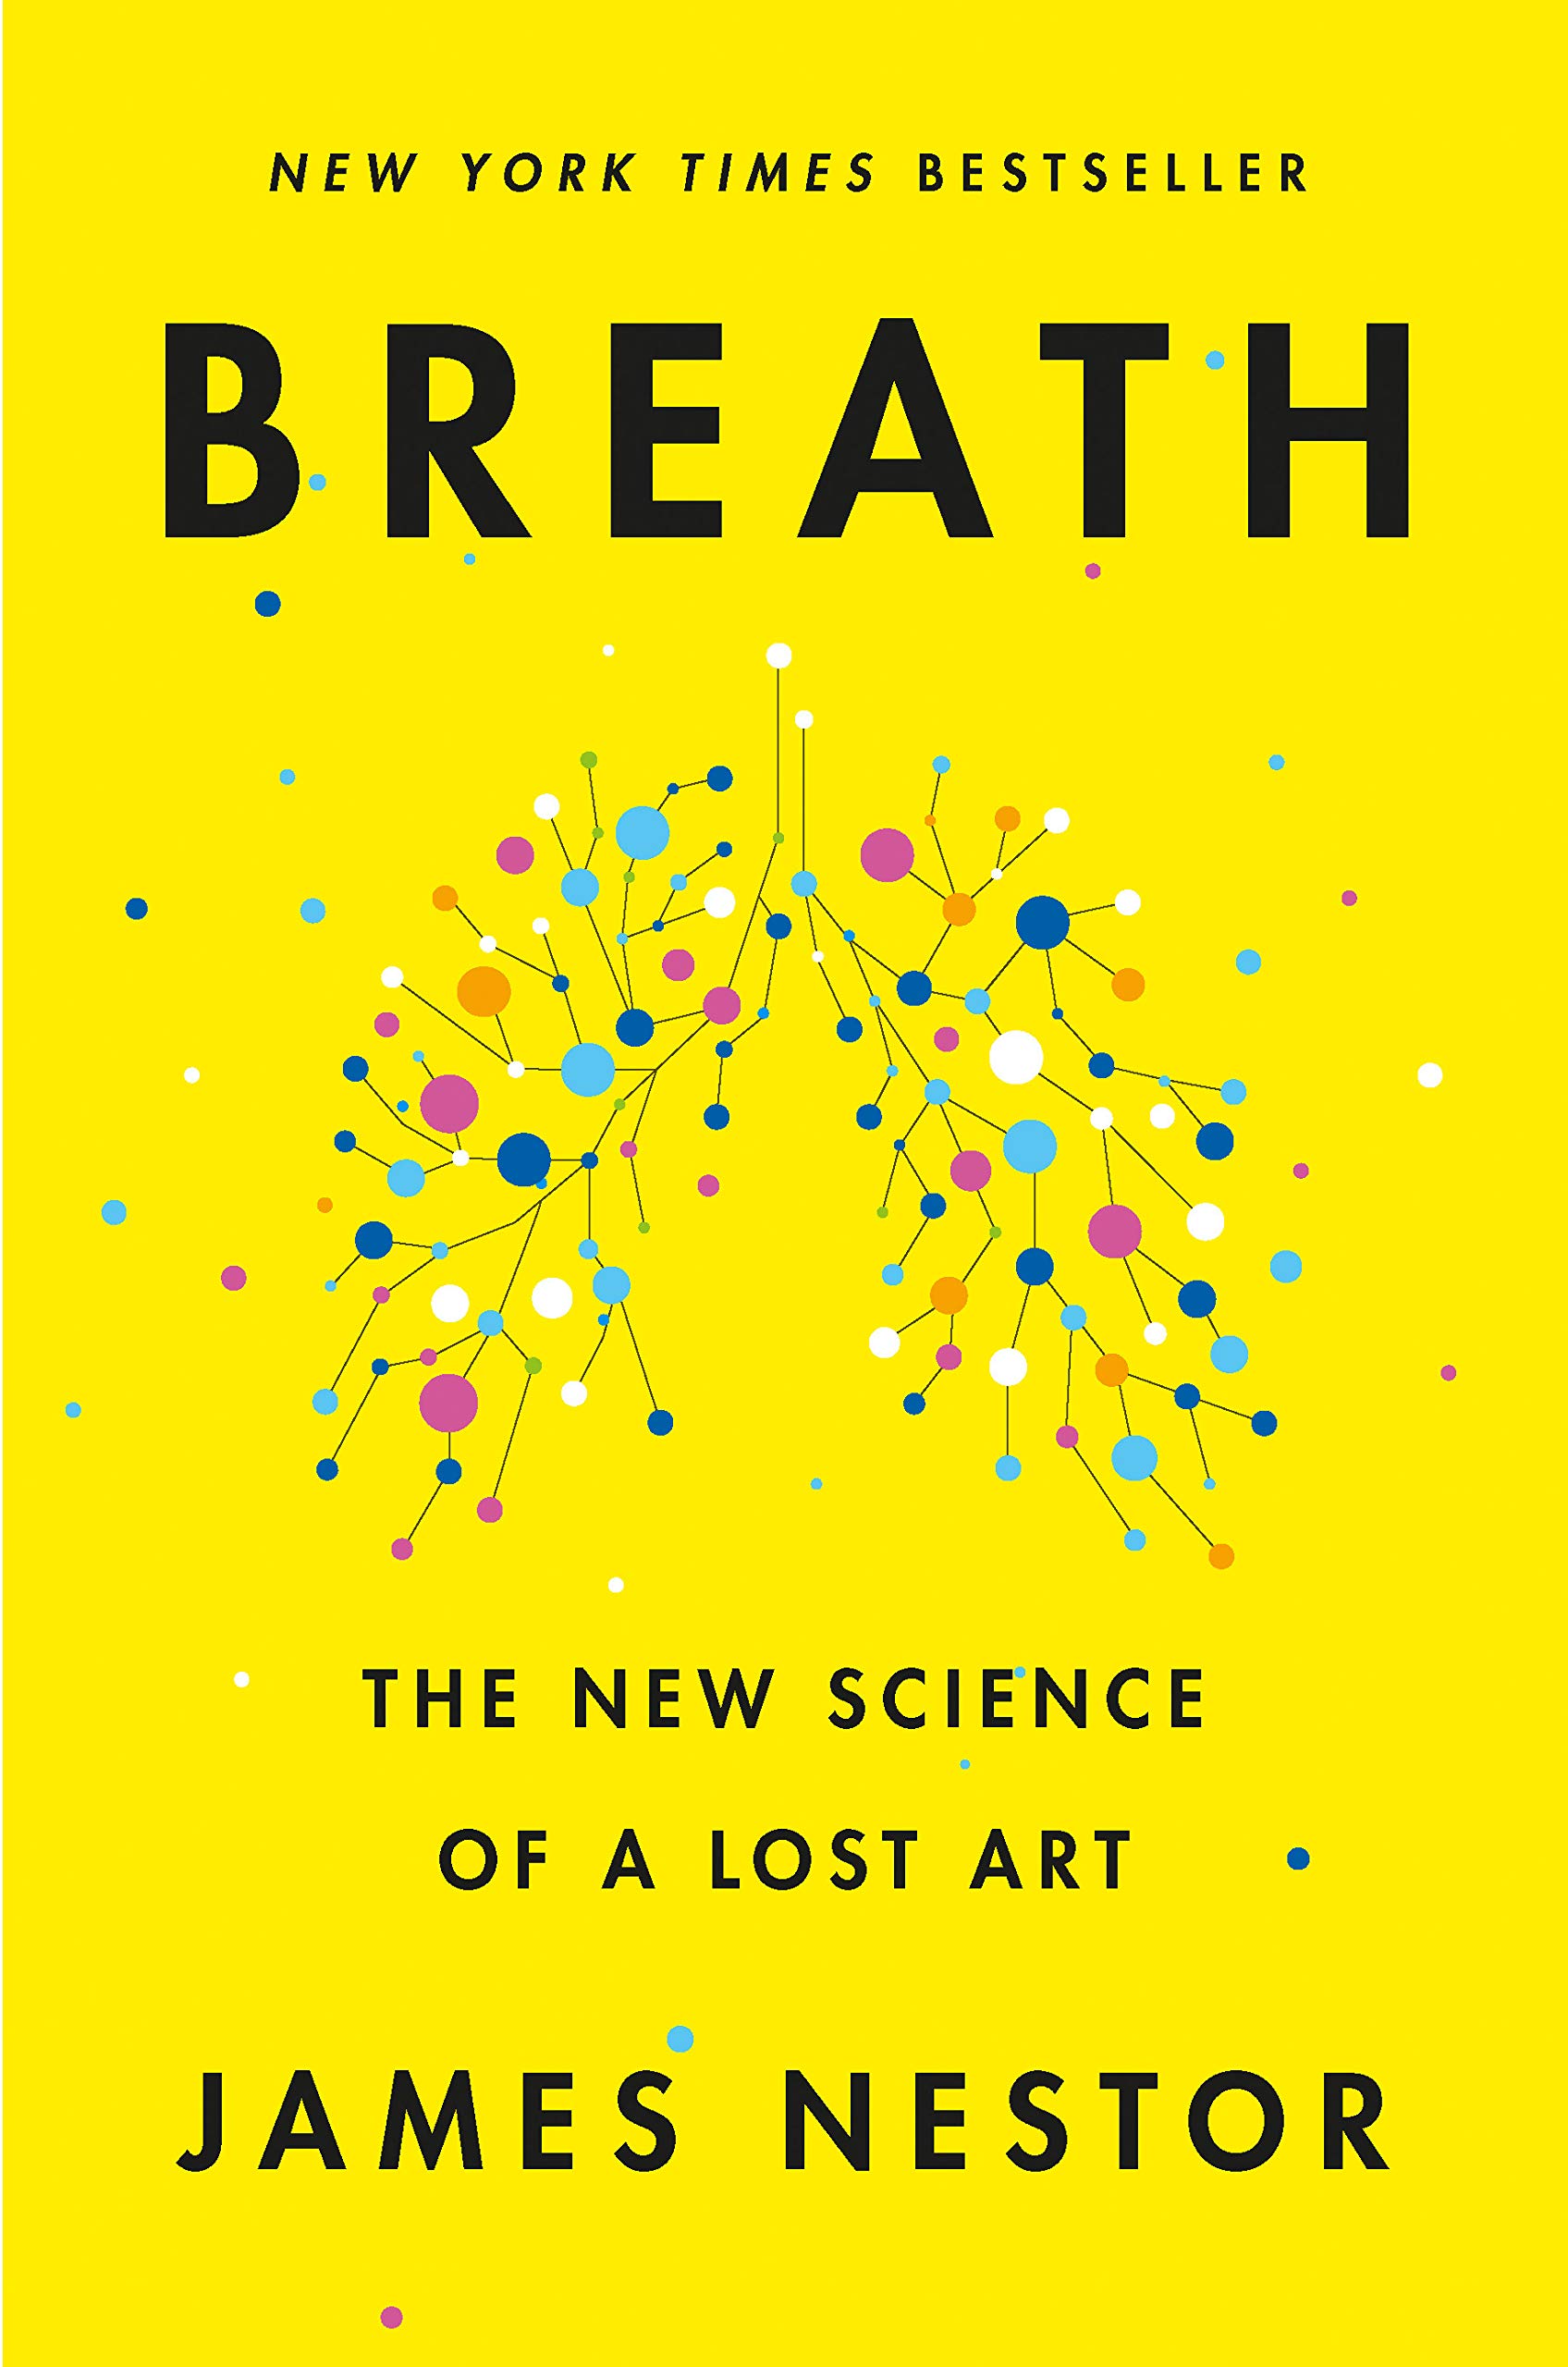 Cover of Breath by James Nestor